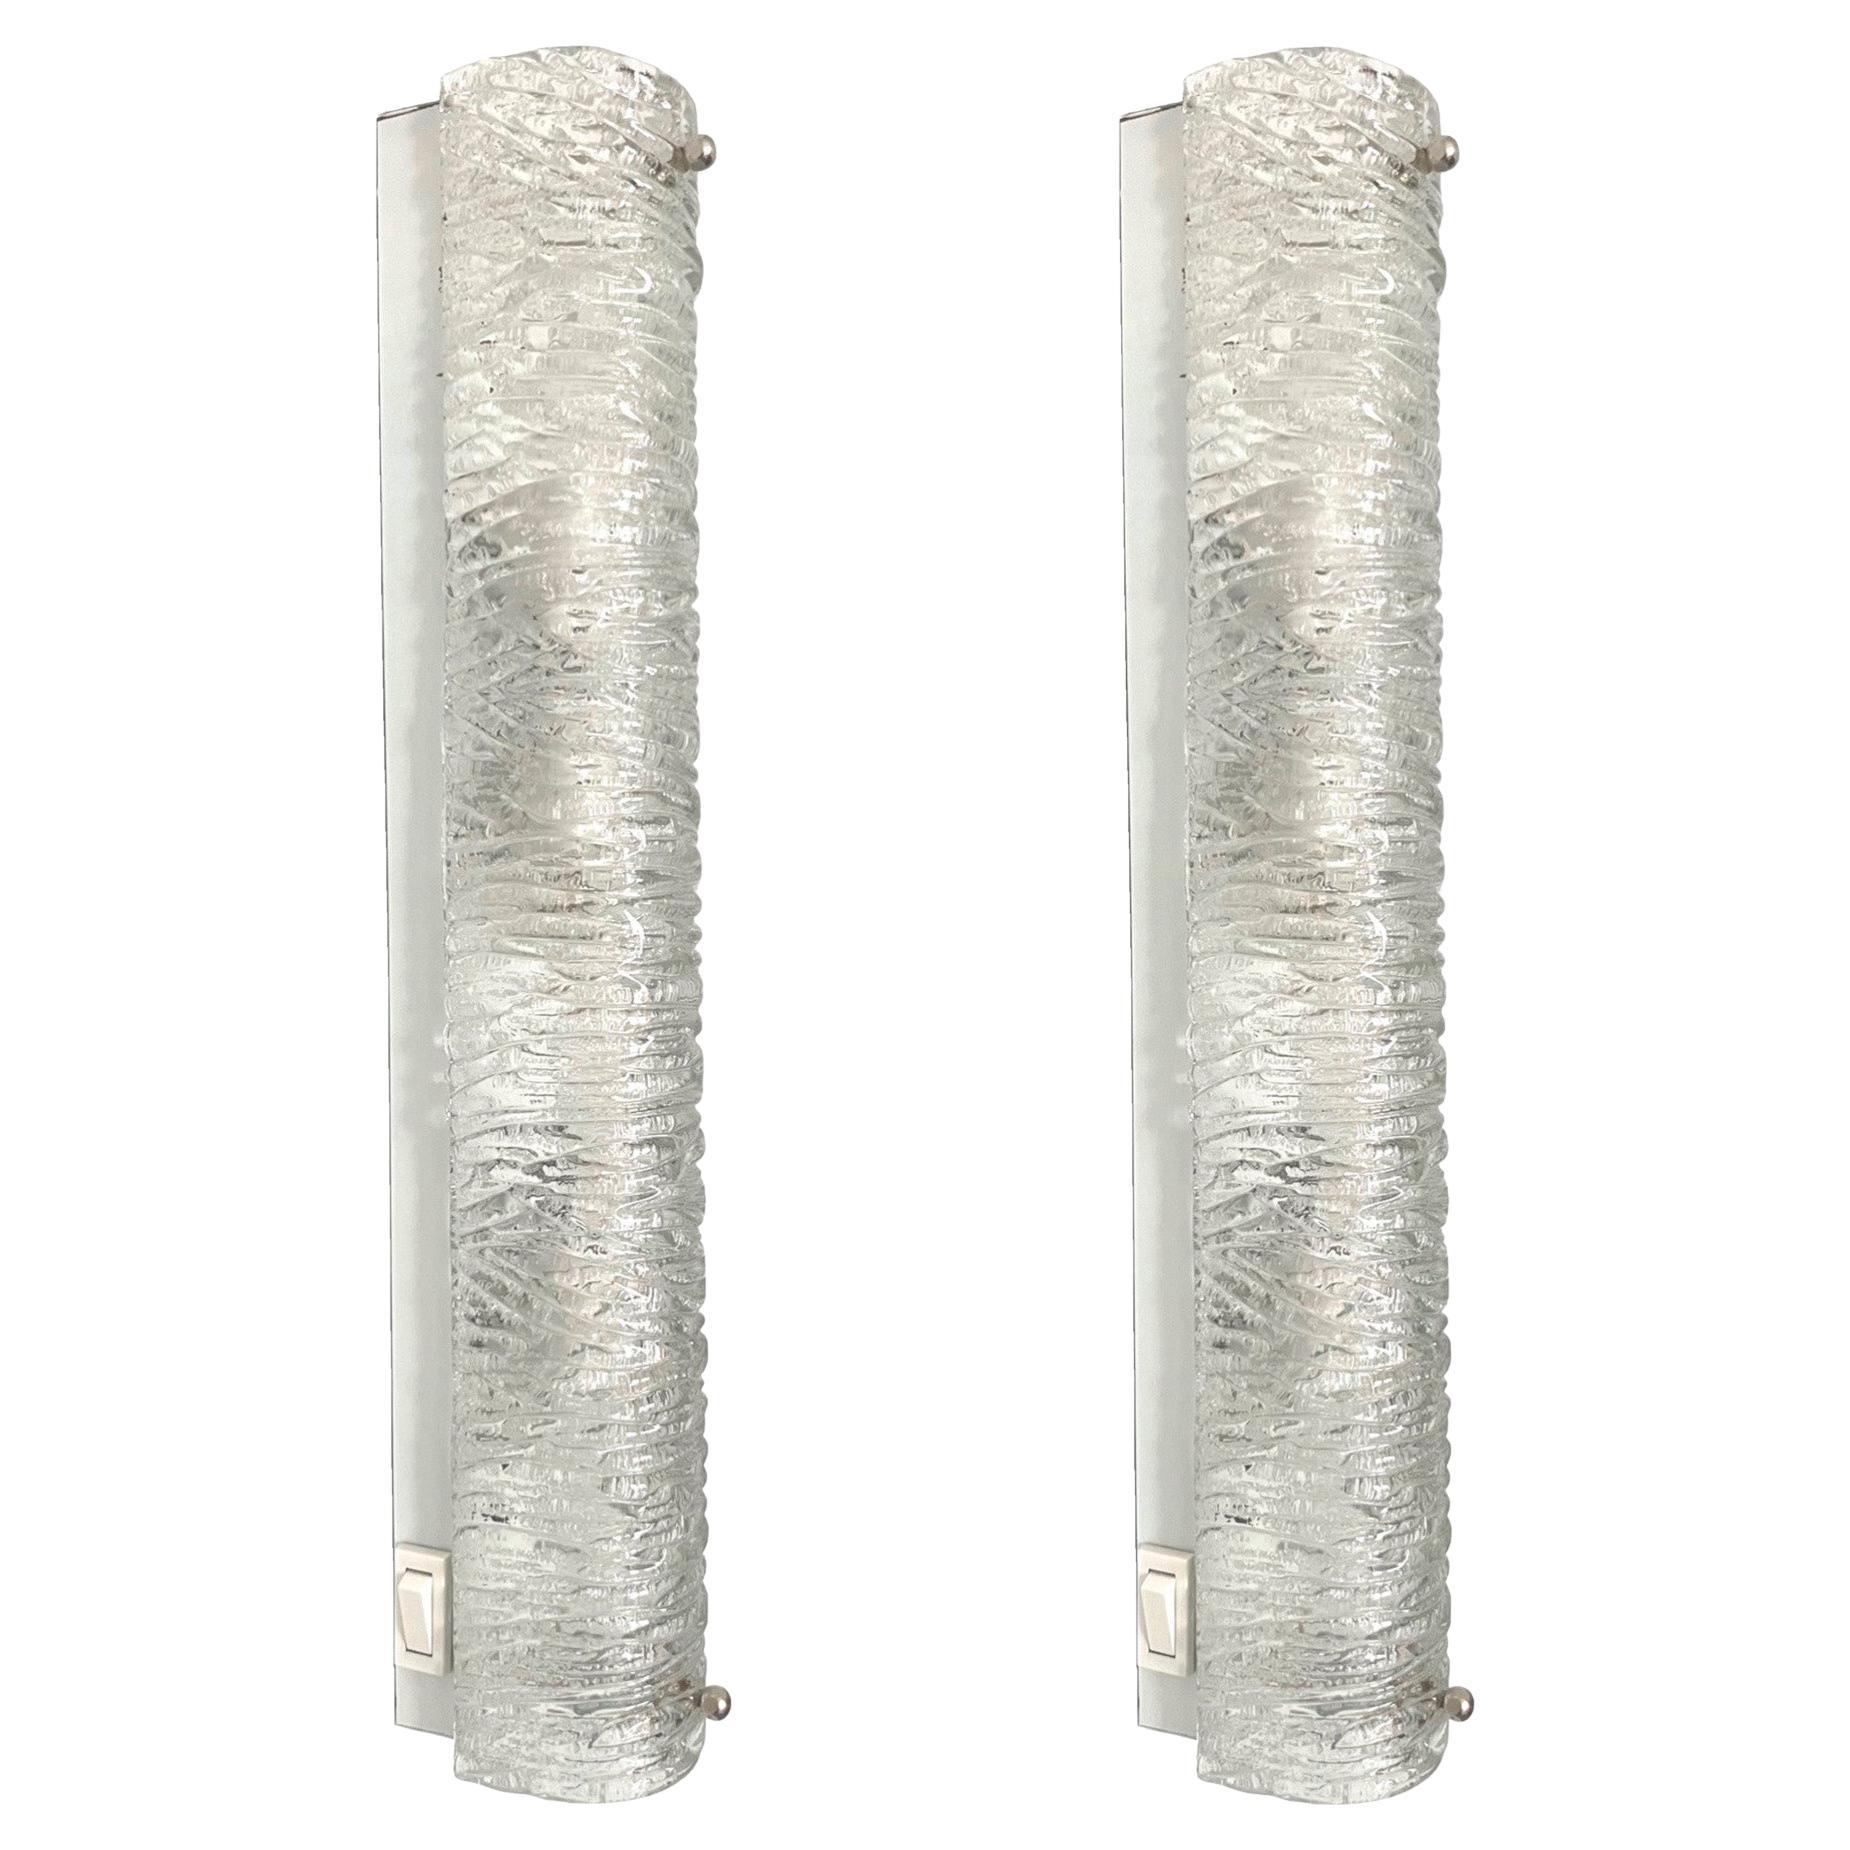 German Midcentury Pair of Murano Glass Wall Sconces by Hillebrand, 1970s For Sale